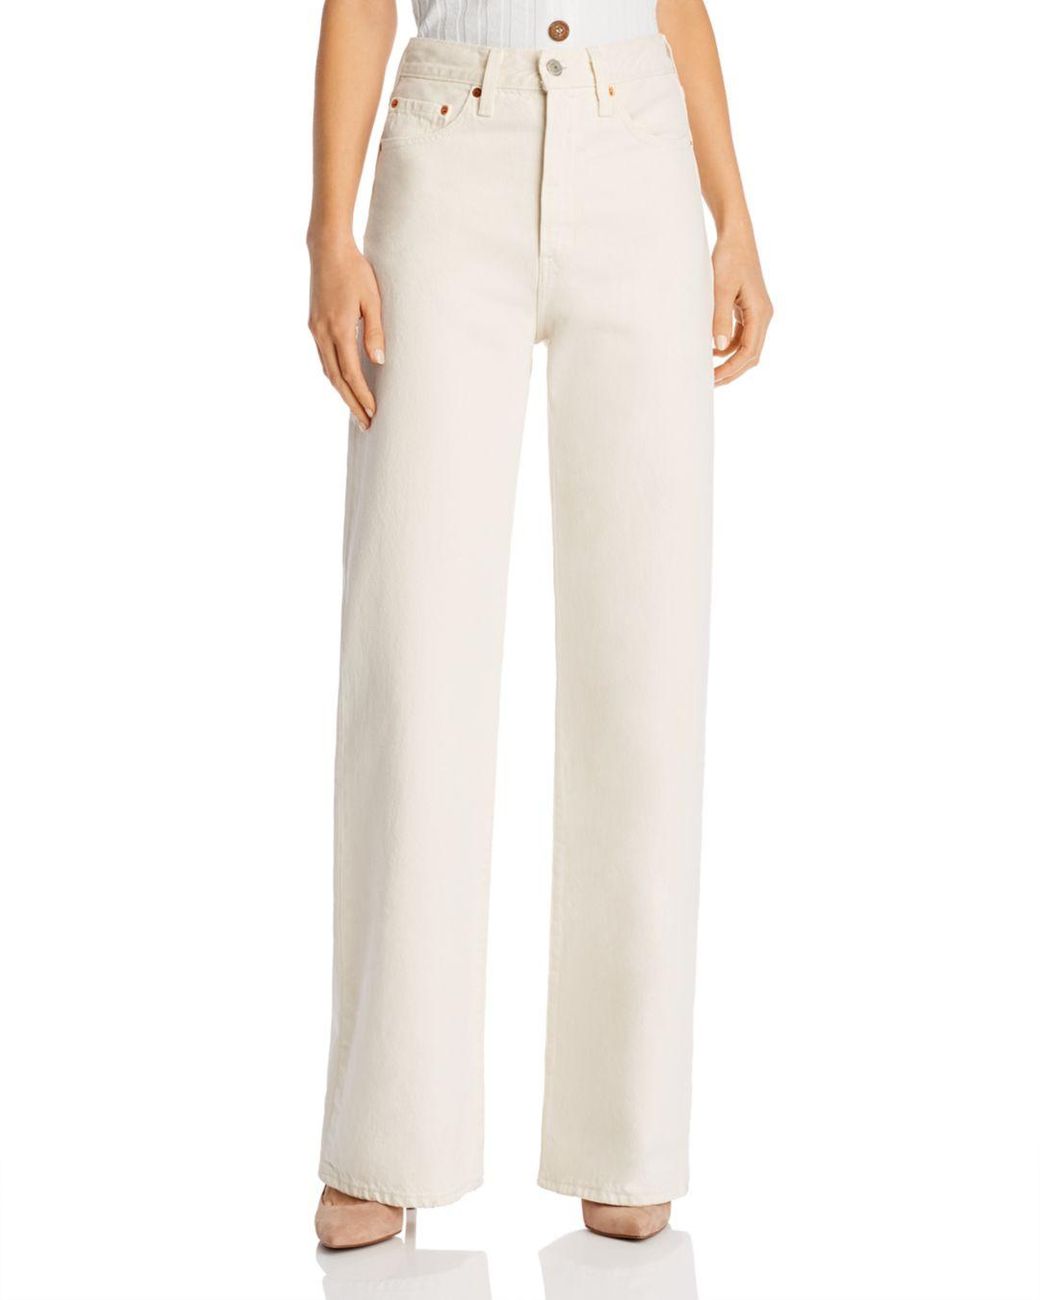 Levi's Ribcage Wide - Leg Jeans In Icy Ecru in Natural | Lyst